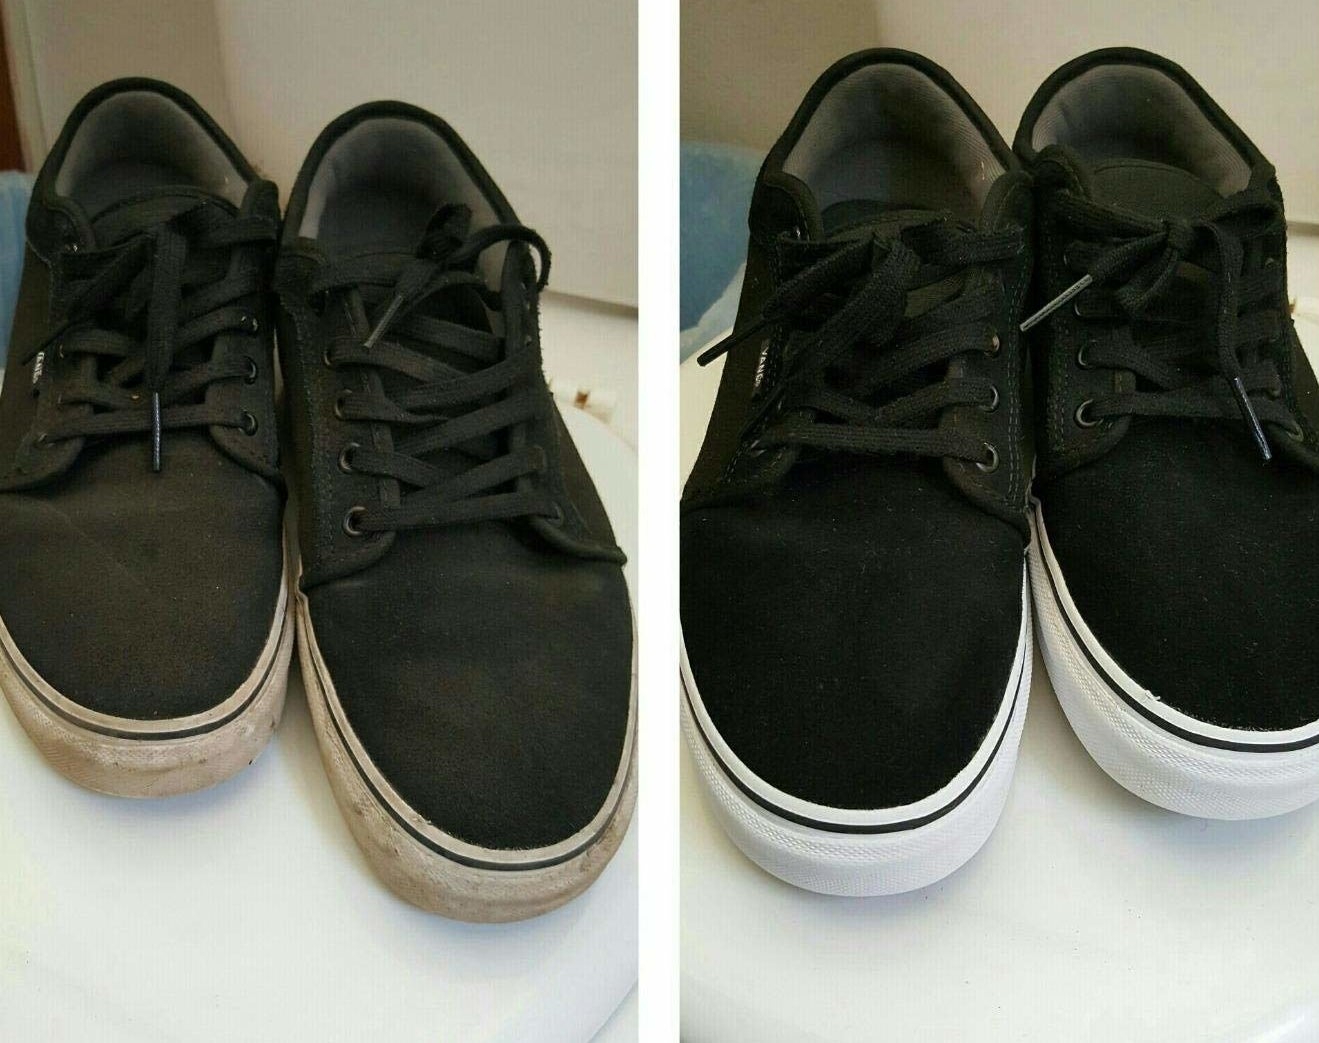 Reviewer photos showing a pair of shoes before and after getting cleaned with the kit. The dirty shoes are completely restored to a new appearance